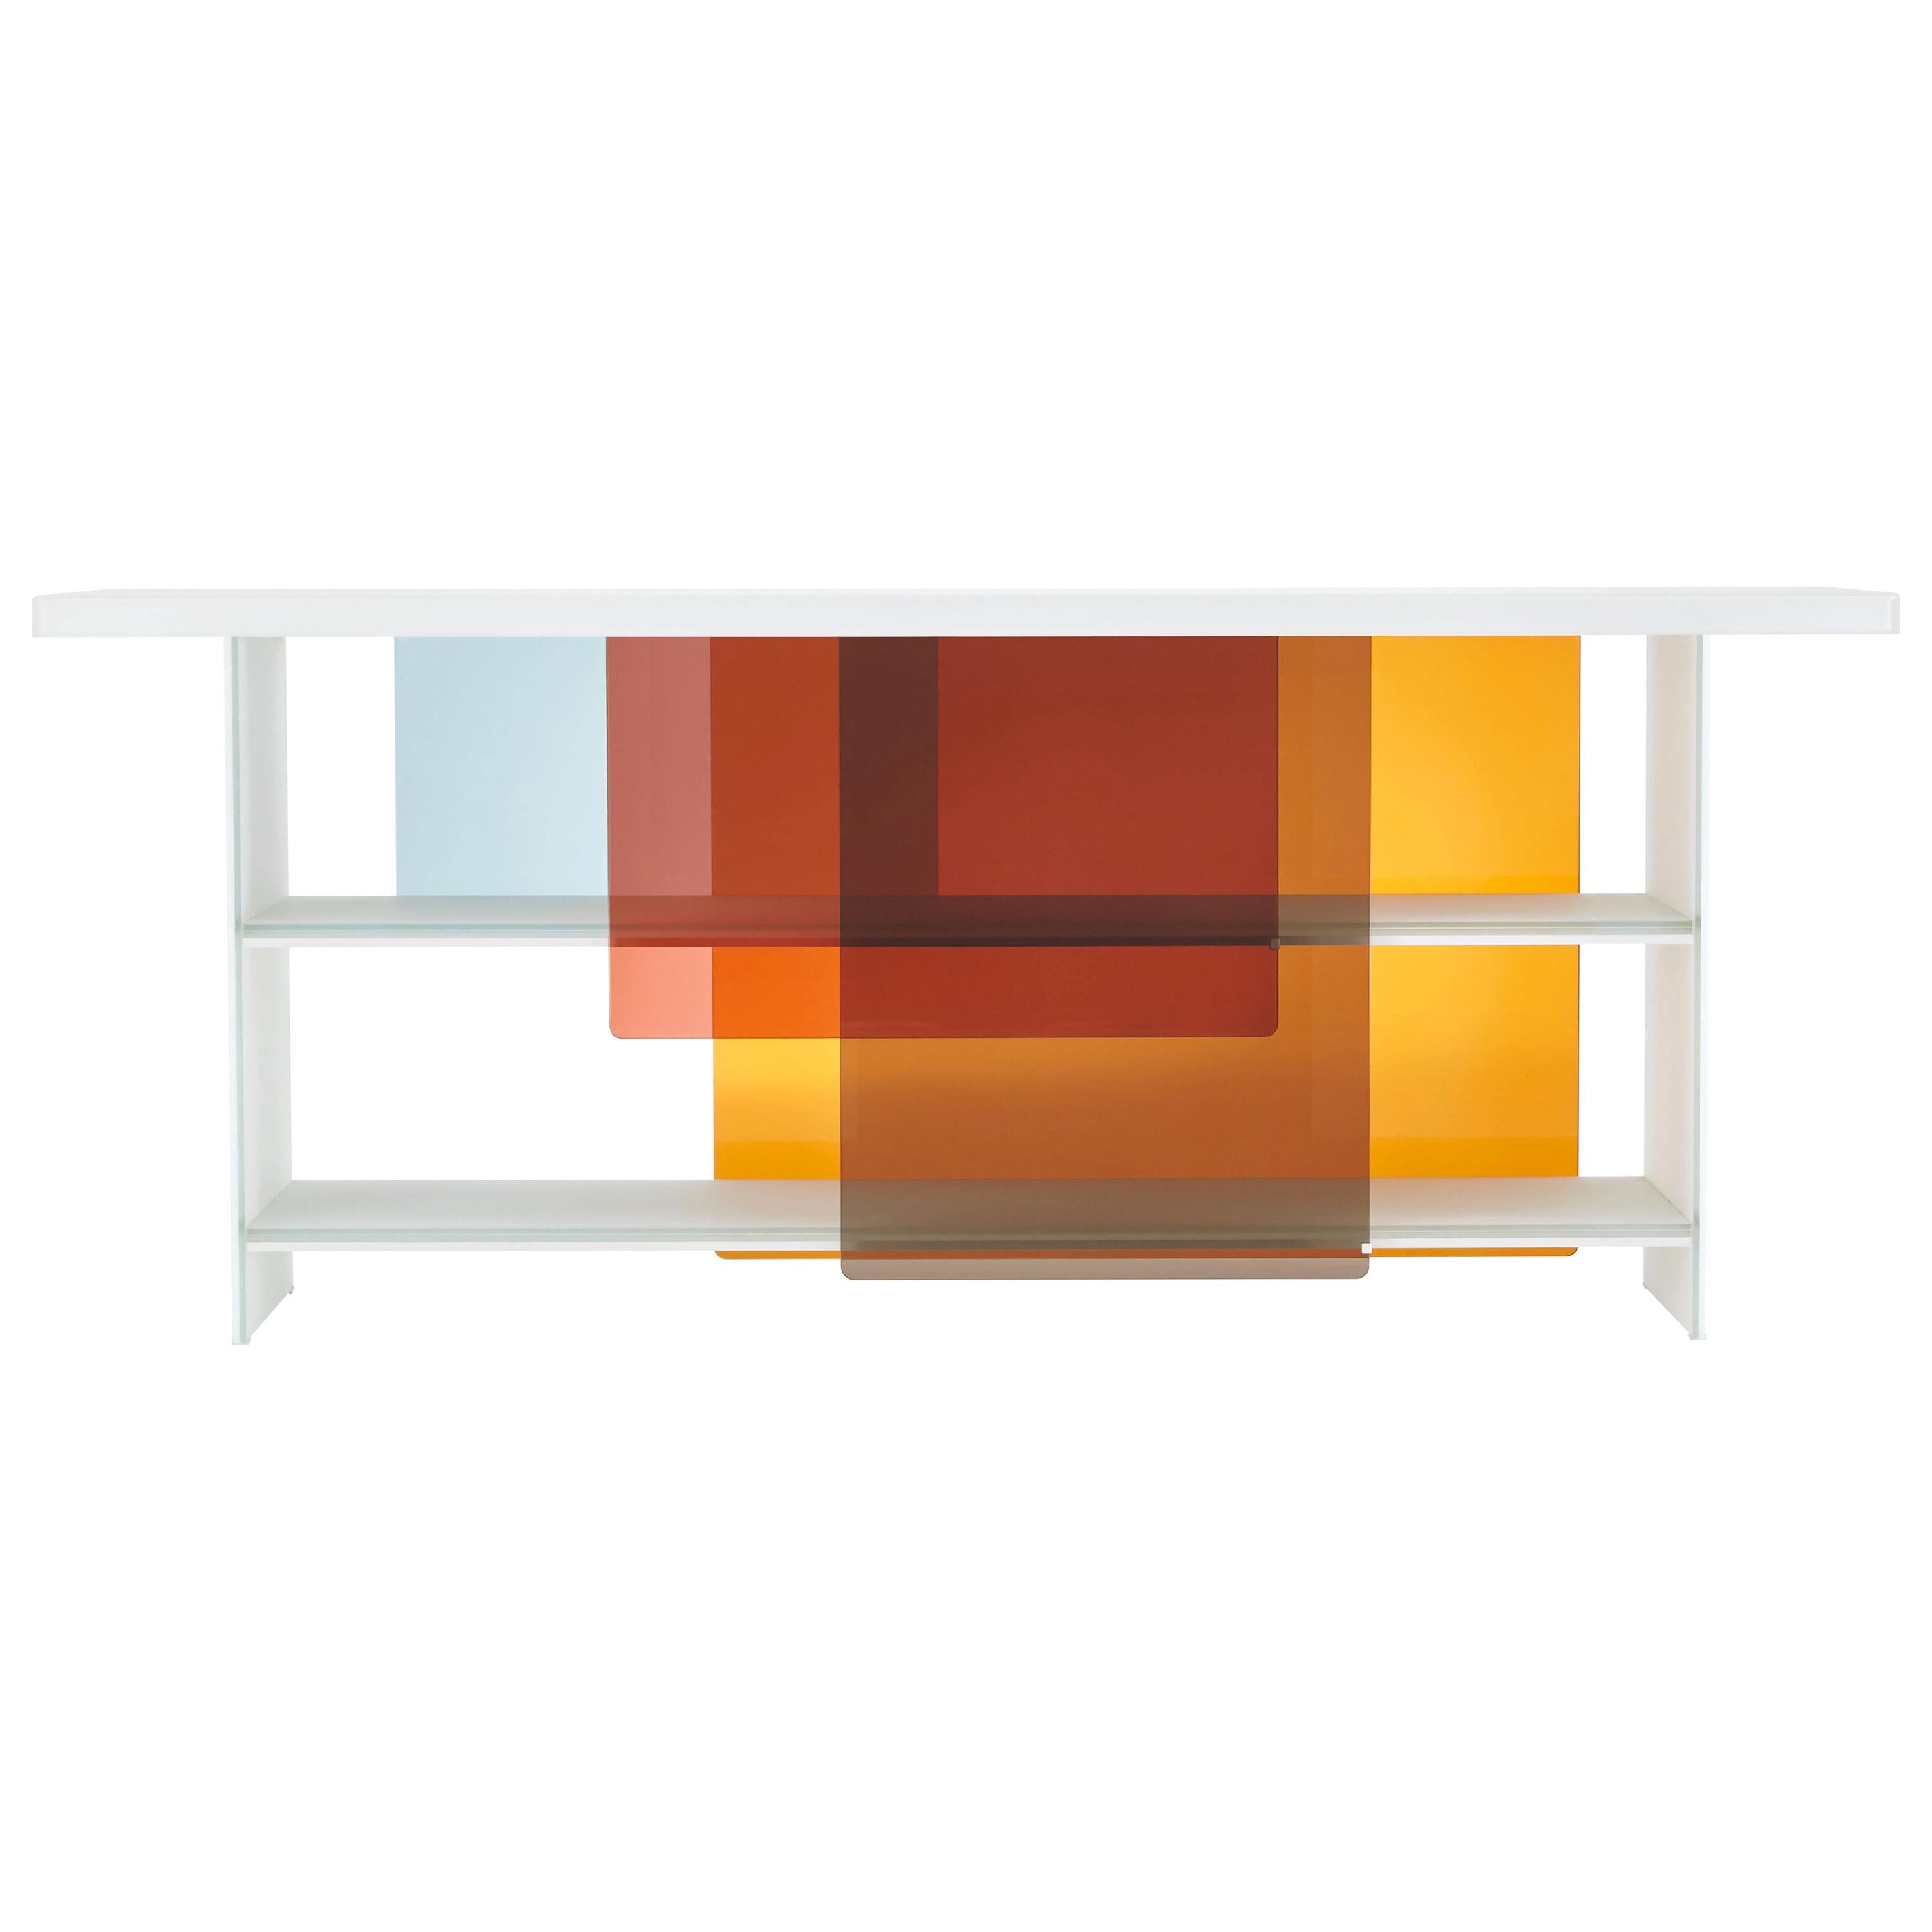 LAYERS Large Glass Bookshelves, by Design Nendo from Glas Italia